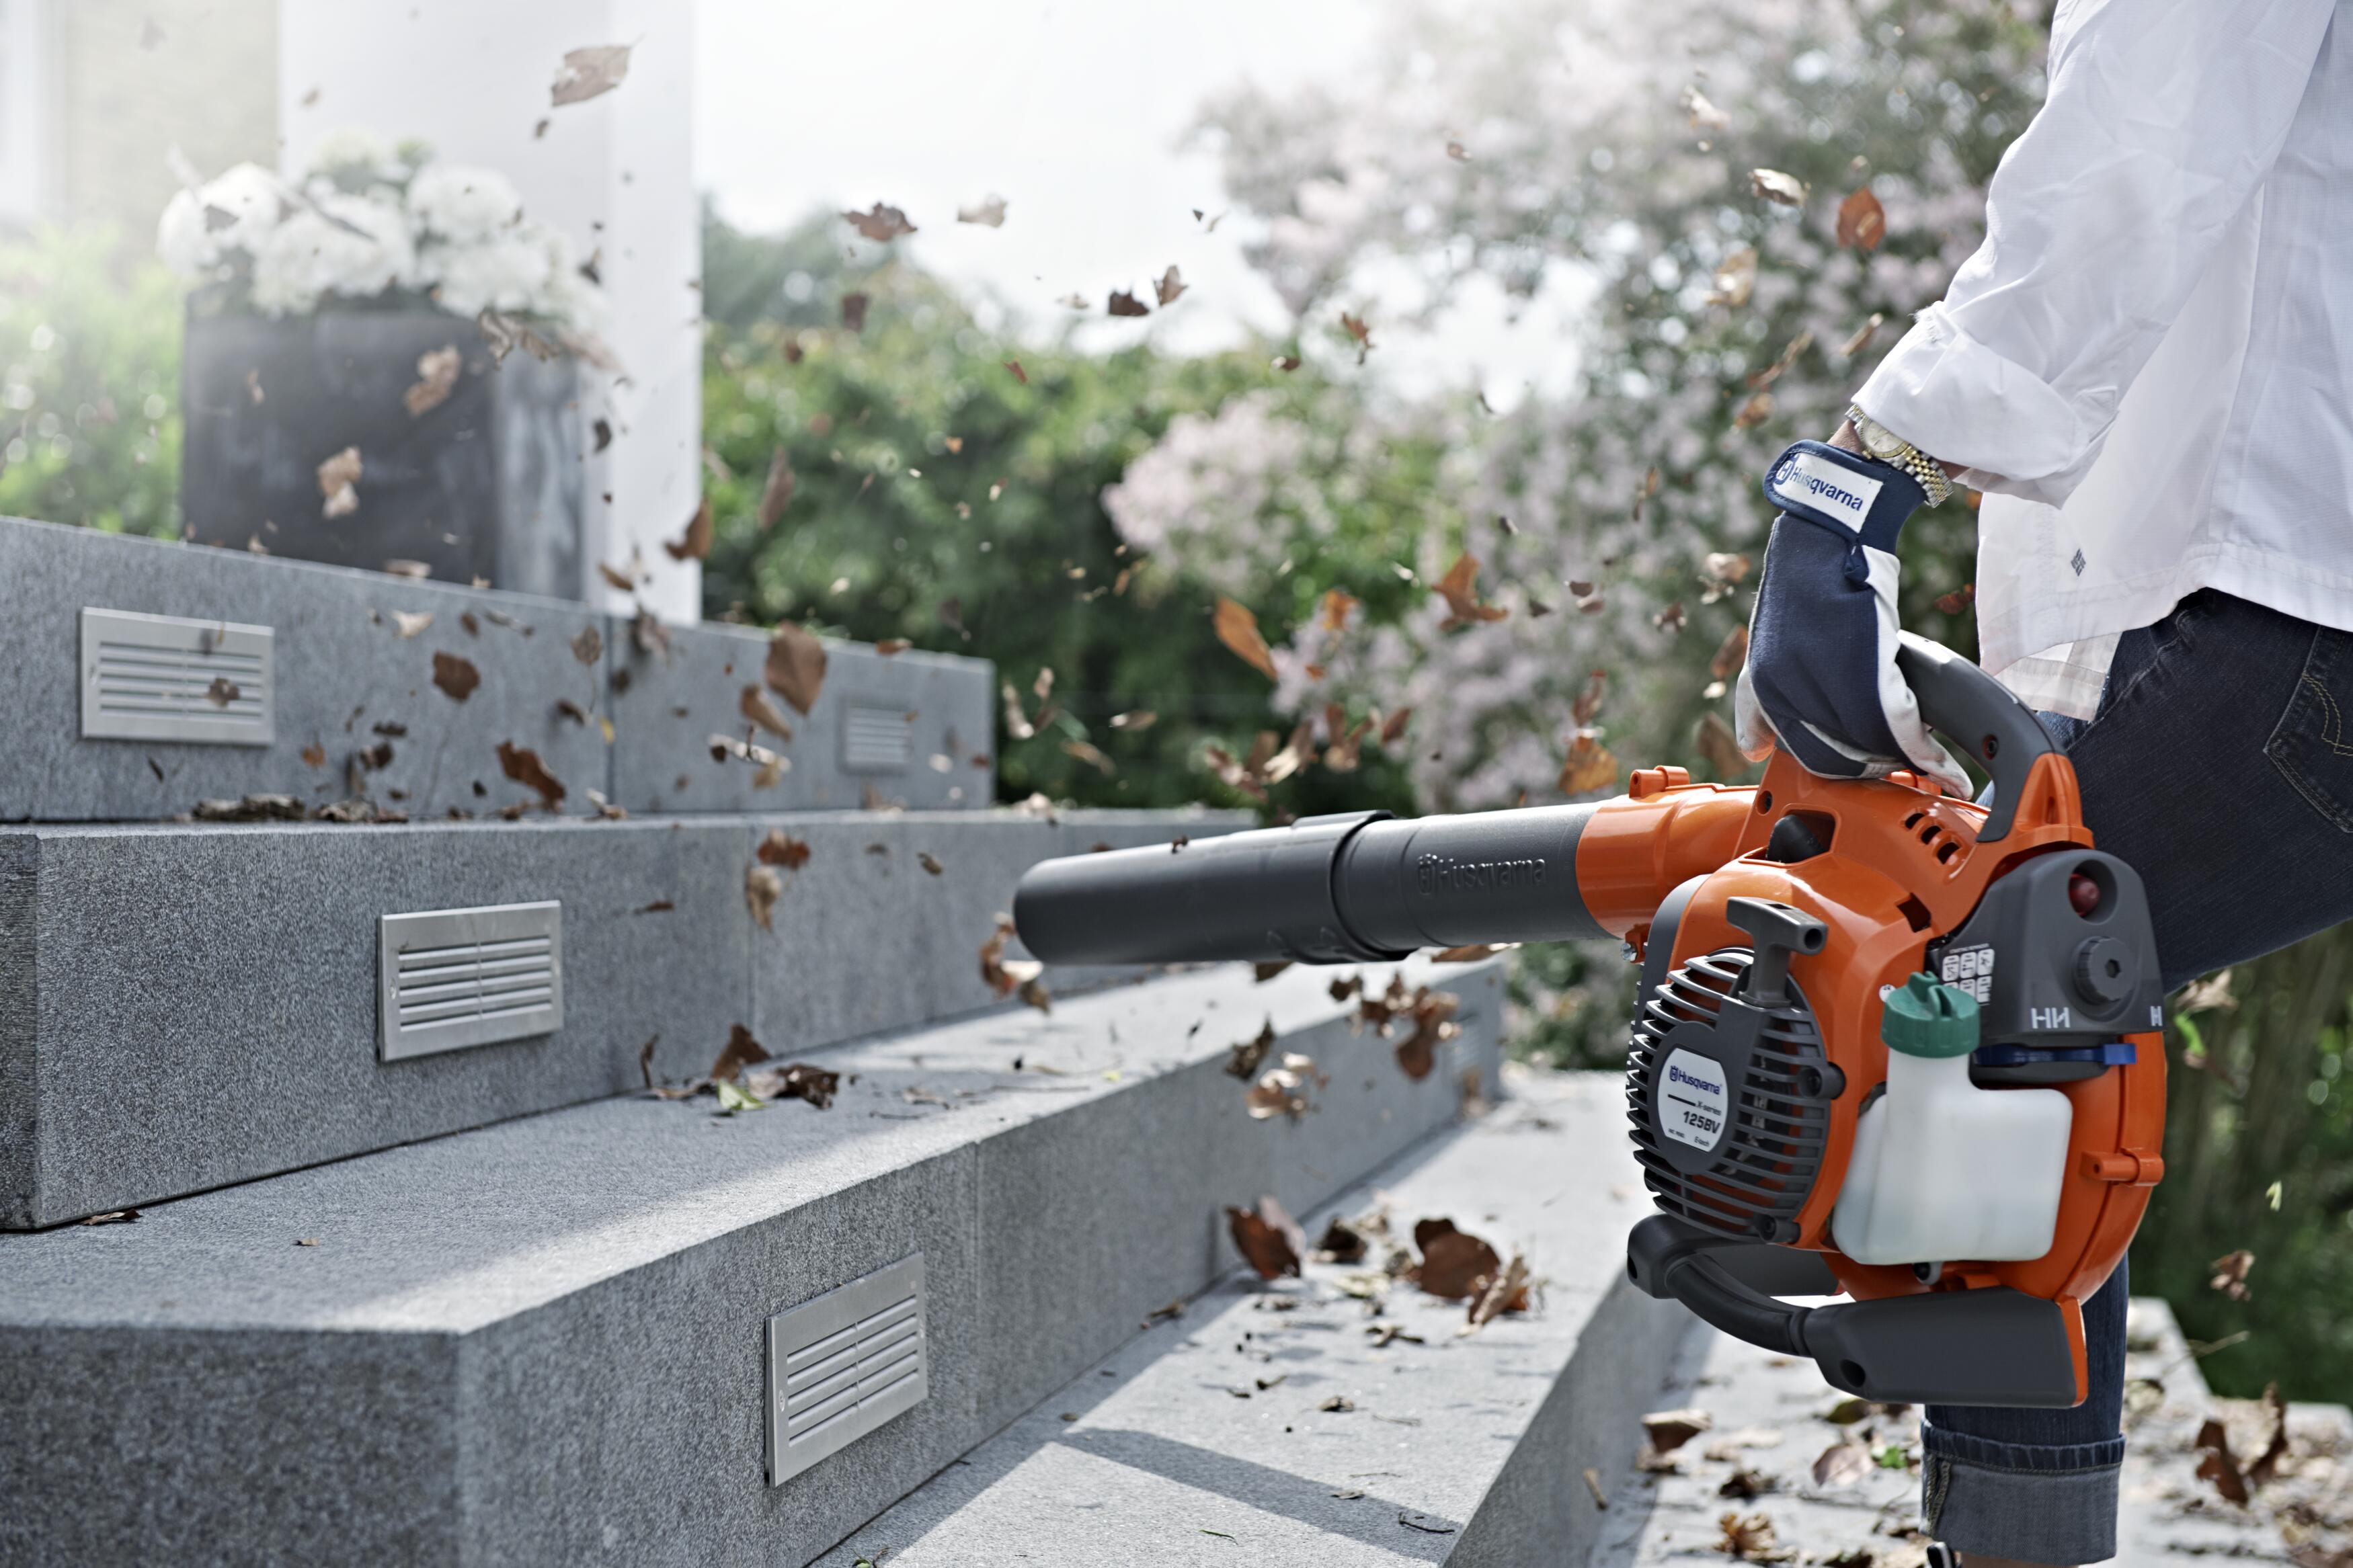 Hand-held and back-pack leaf blowers from Husqvarna